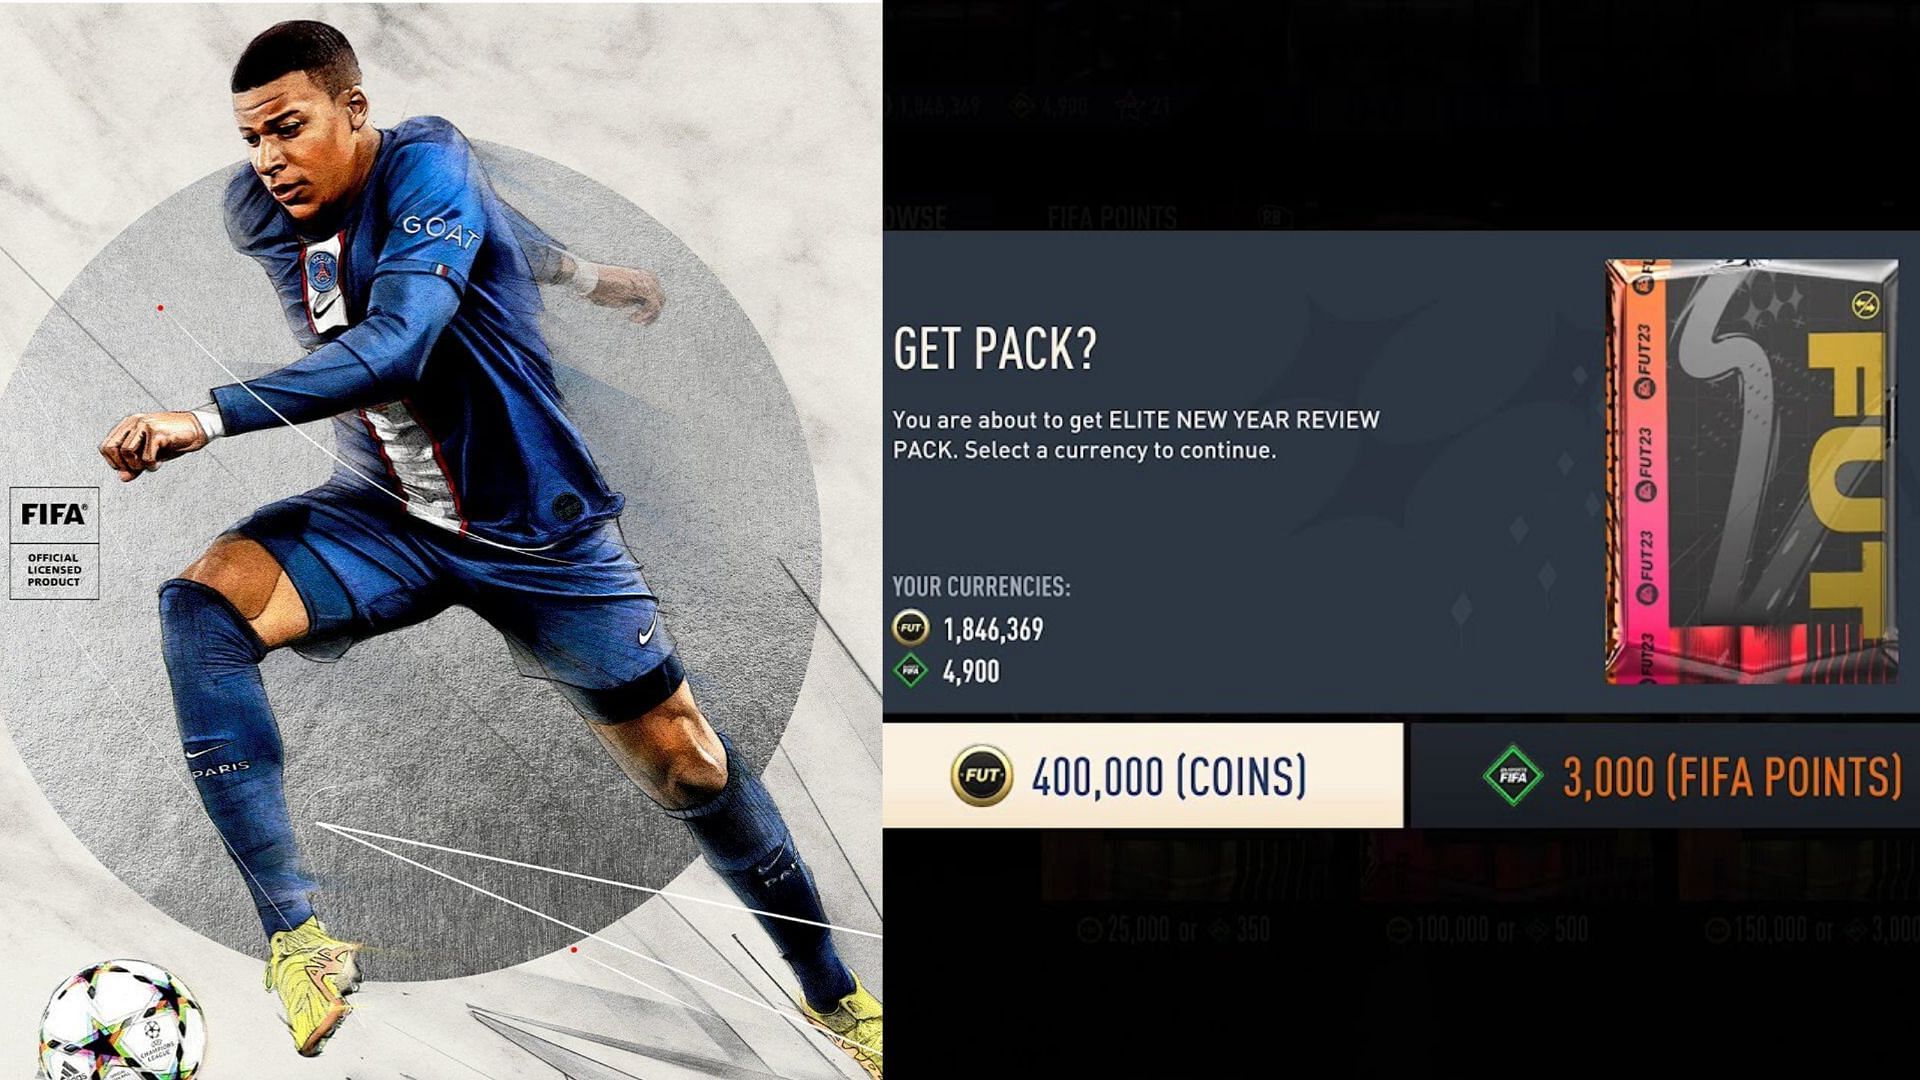 The Elite New Year Review Pack could be worth the investment for many FIFA 23 players (Images via EA Sports)